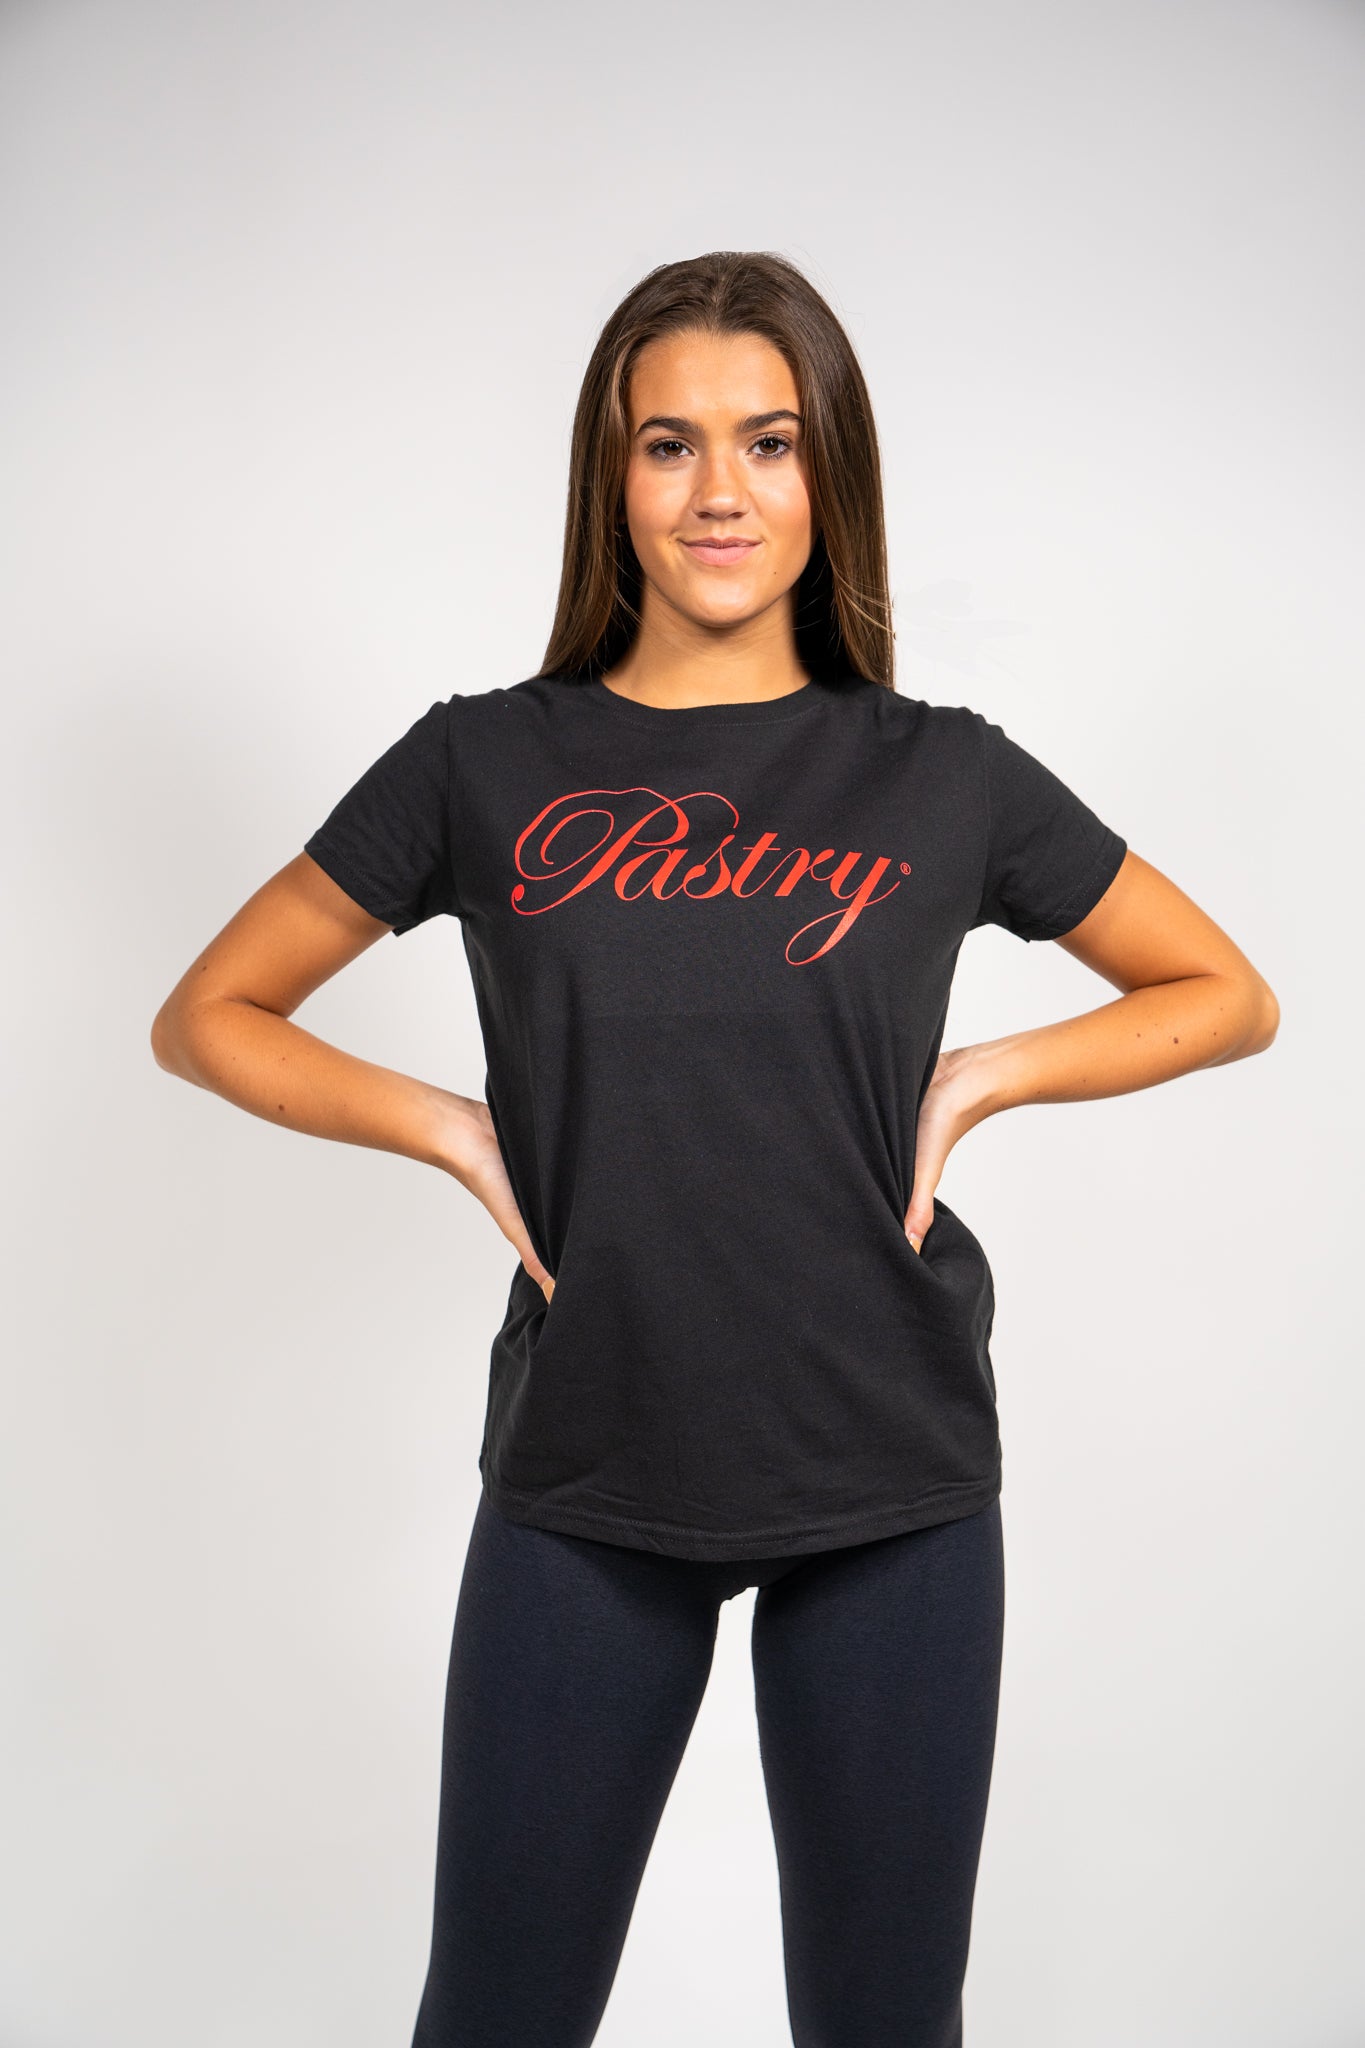 Woman wearing Pastry Tee Shirt Black with Red Logo